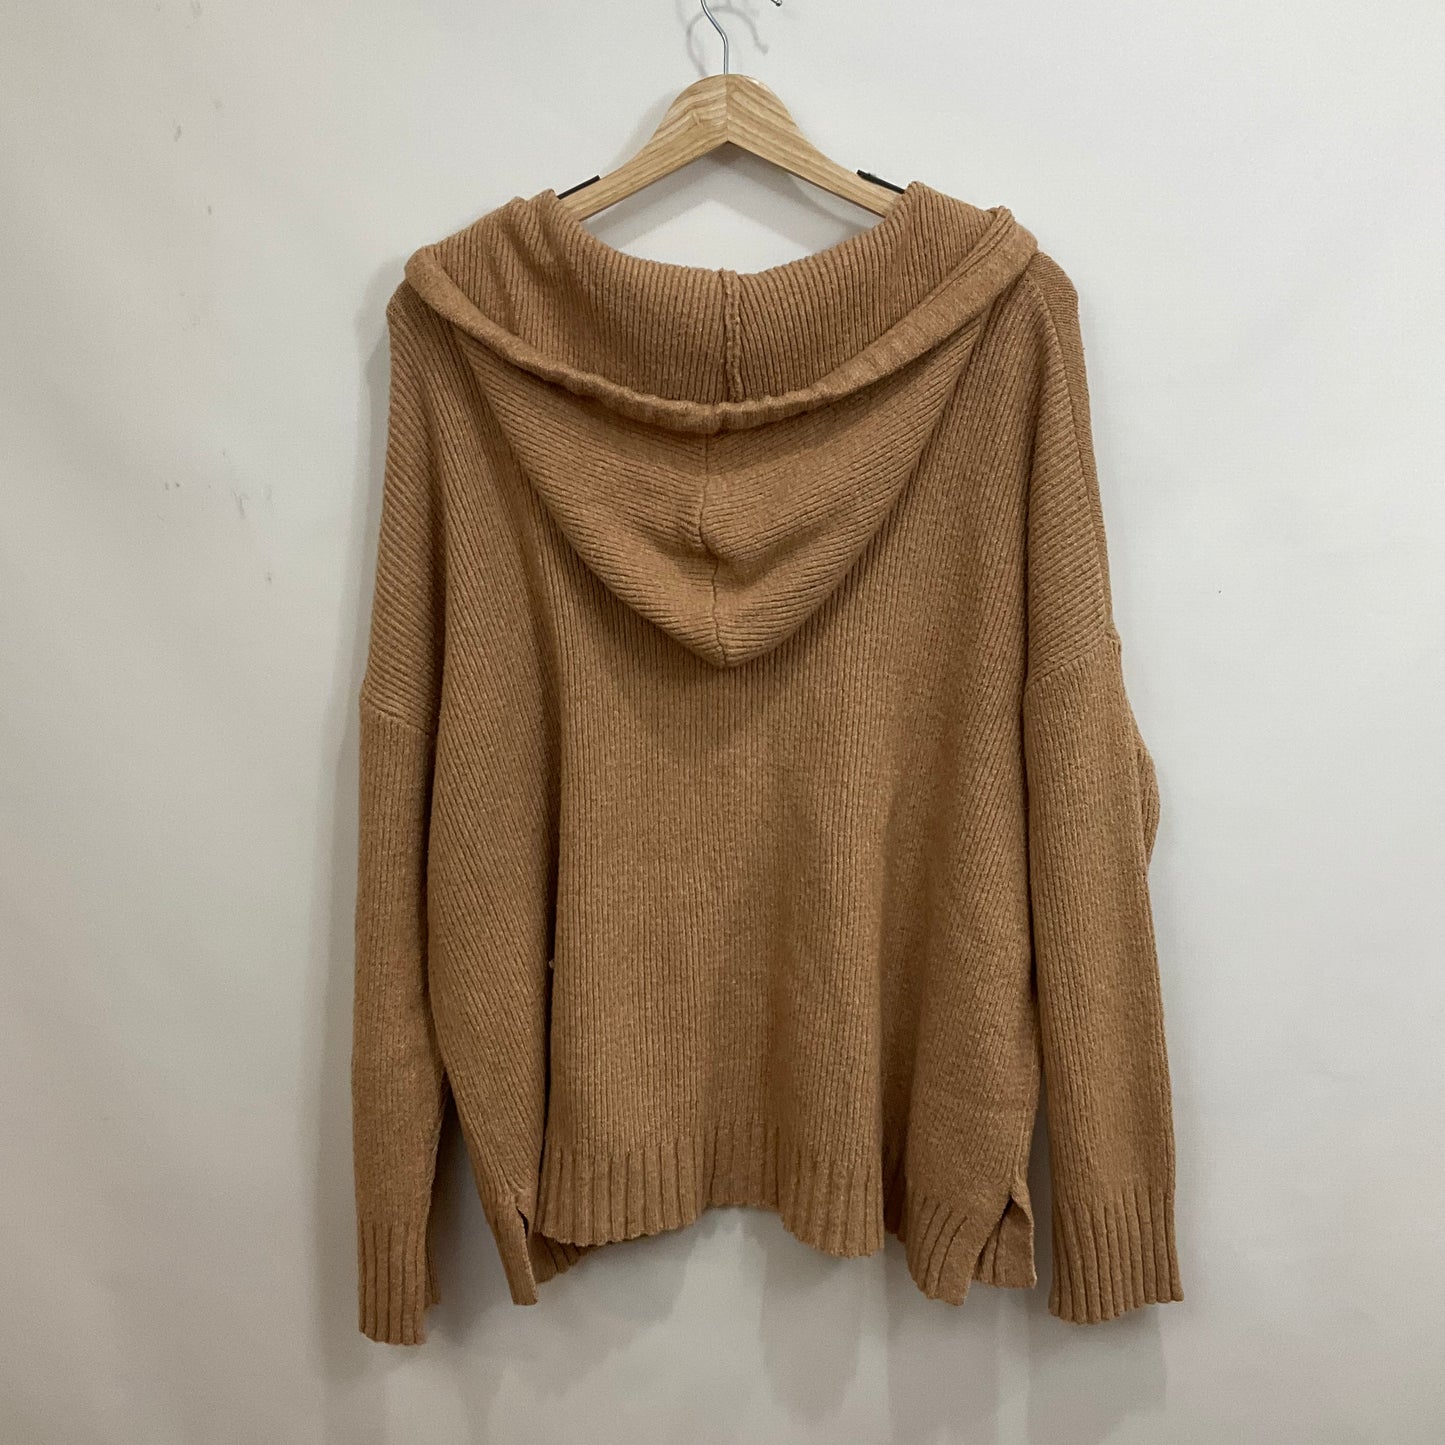 Sweater By Time And Tru  Size: 3x